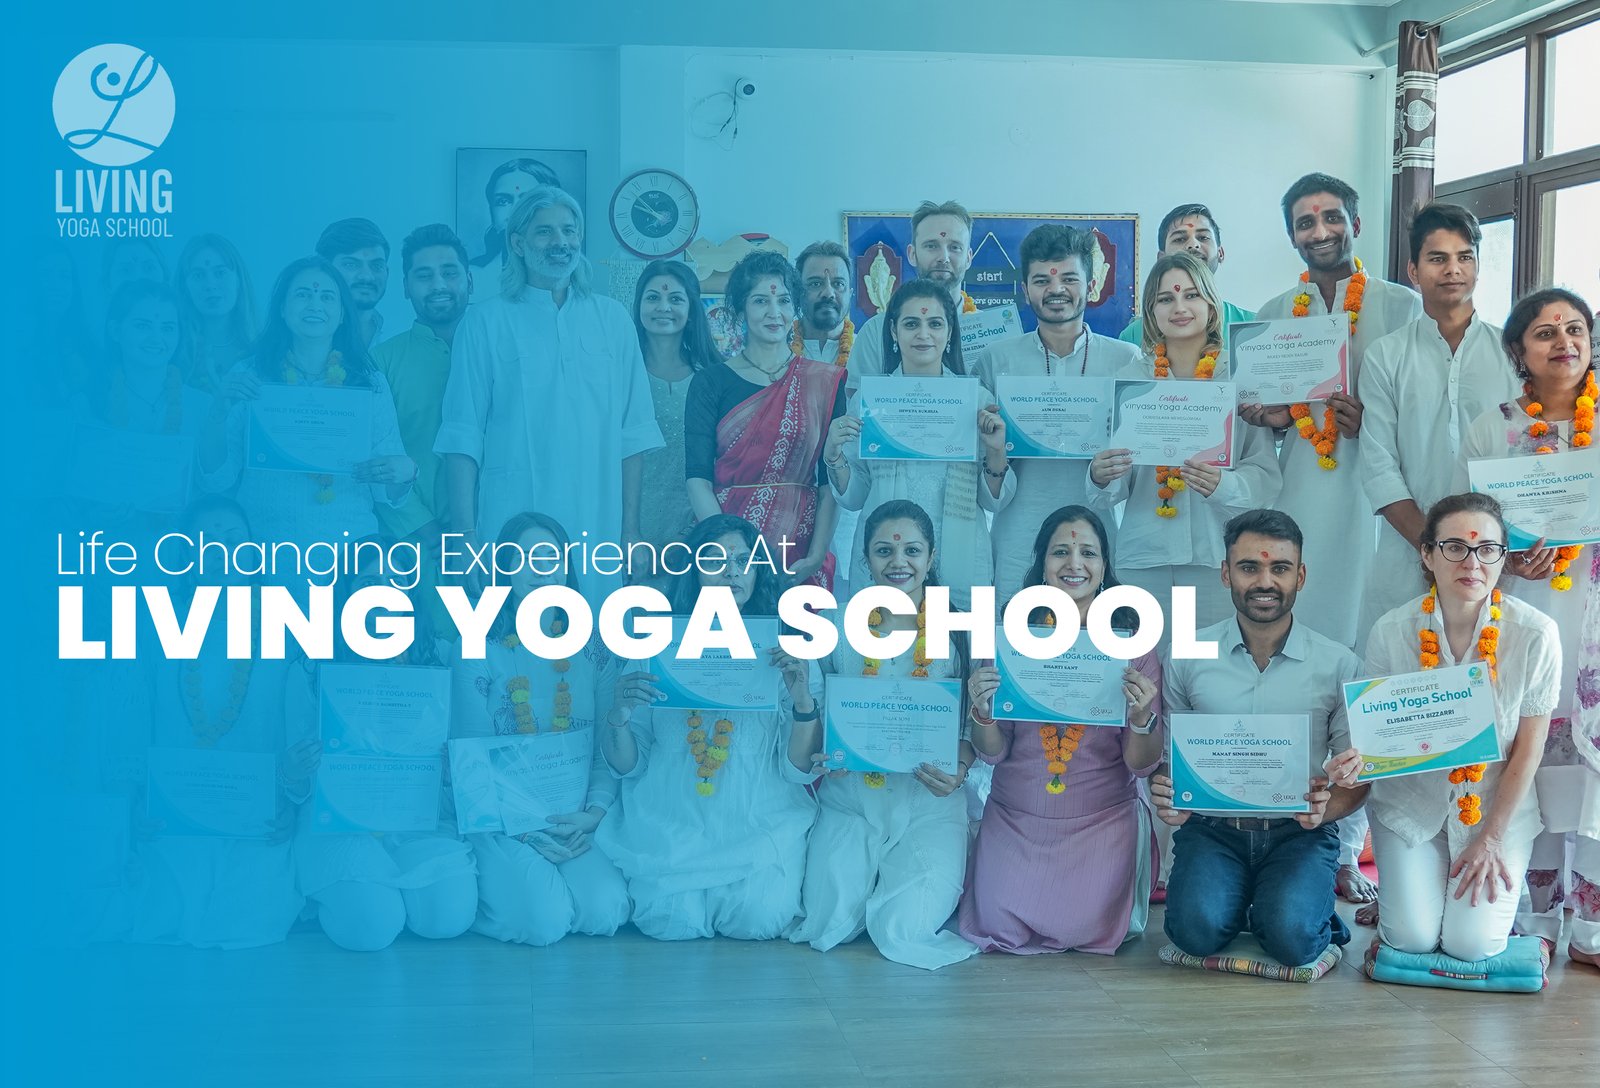 Life Changing Experience At Living Yoga School